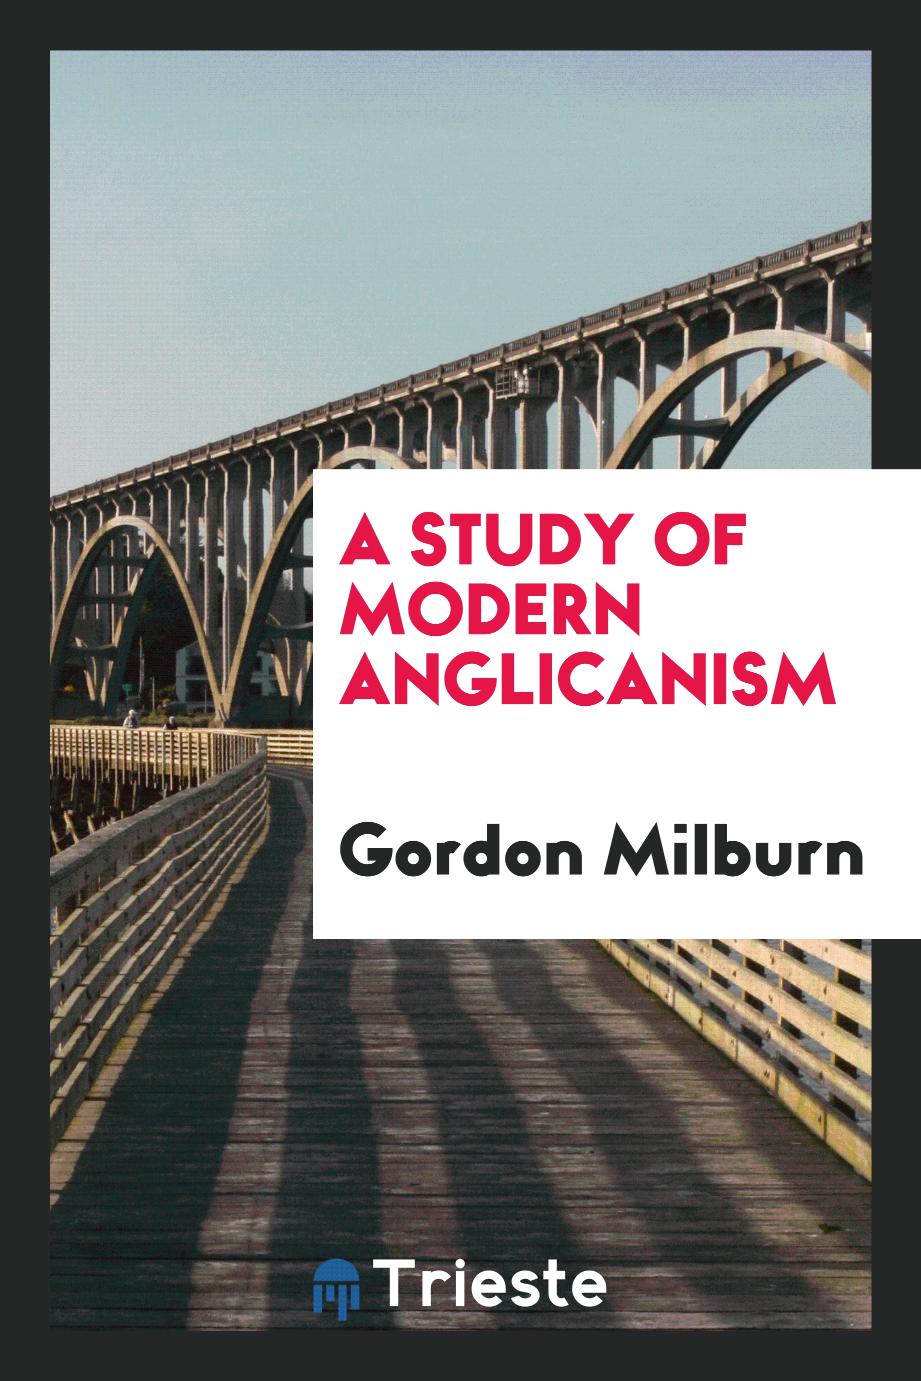 A Study of Modern Anglicanism